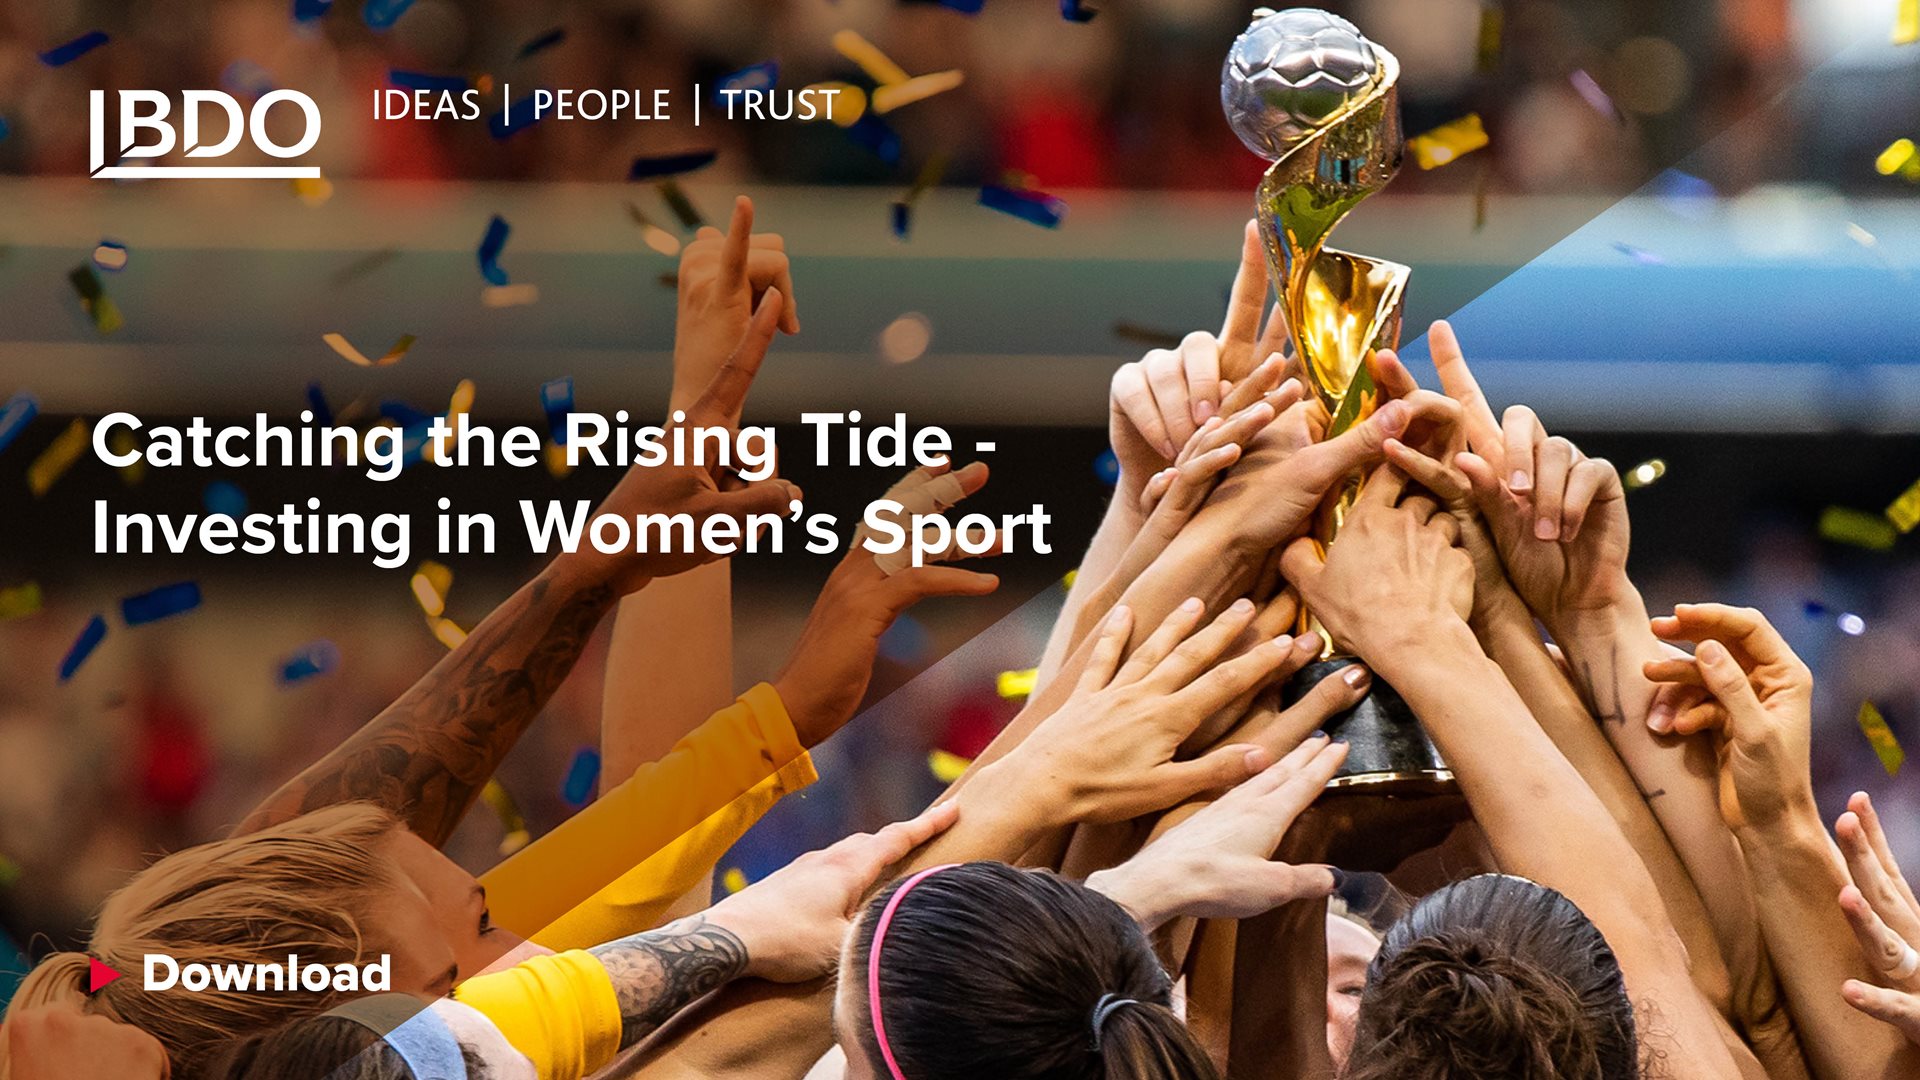 Invest in Women's Sports